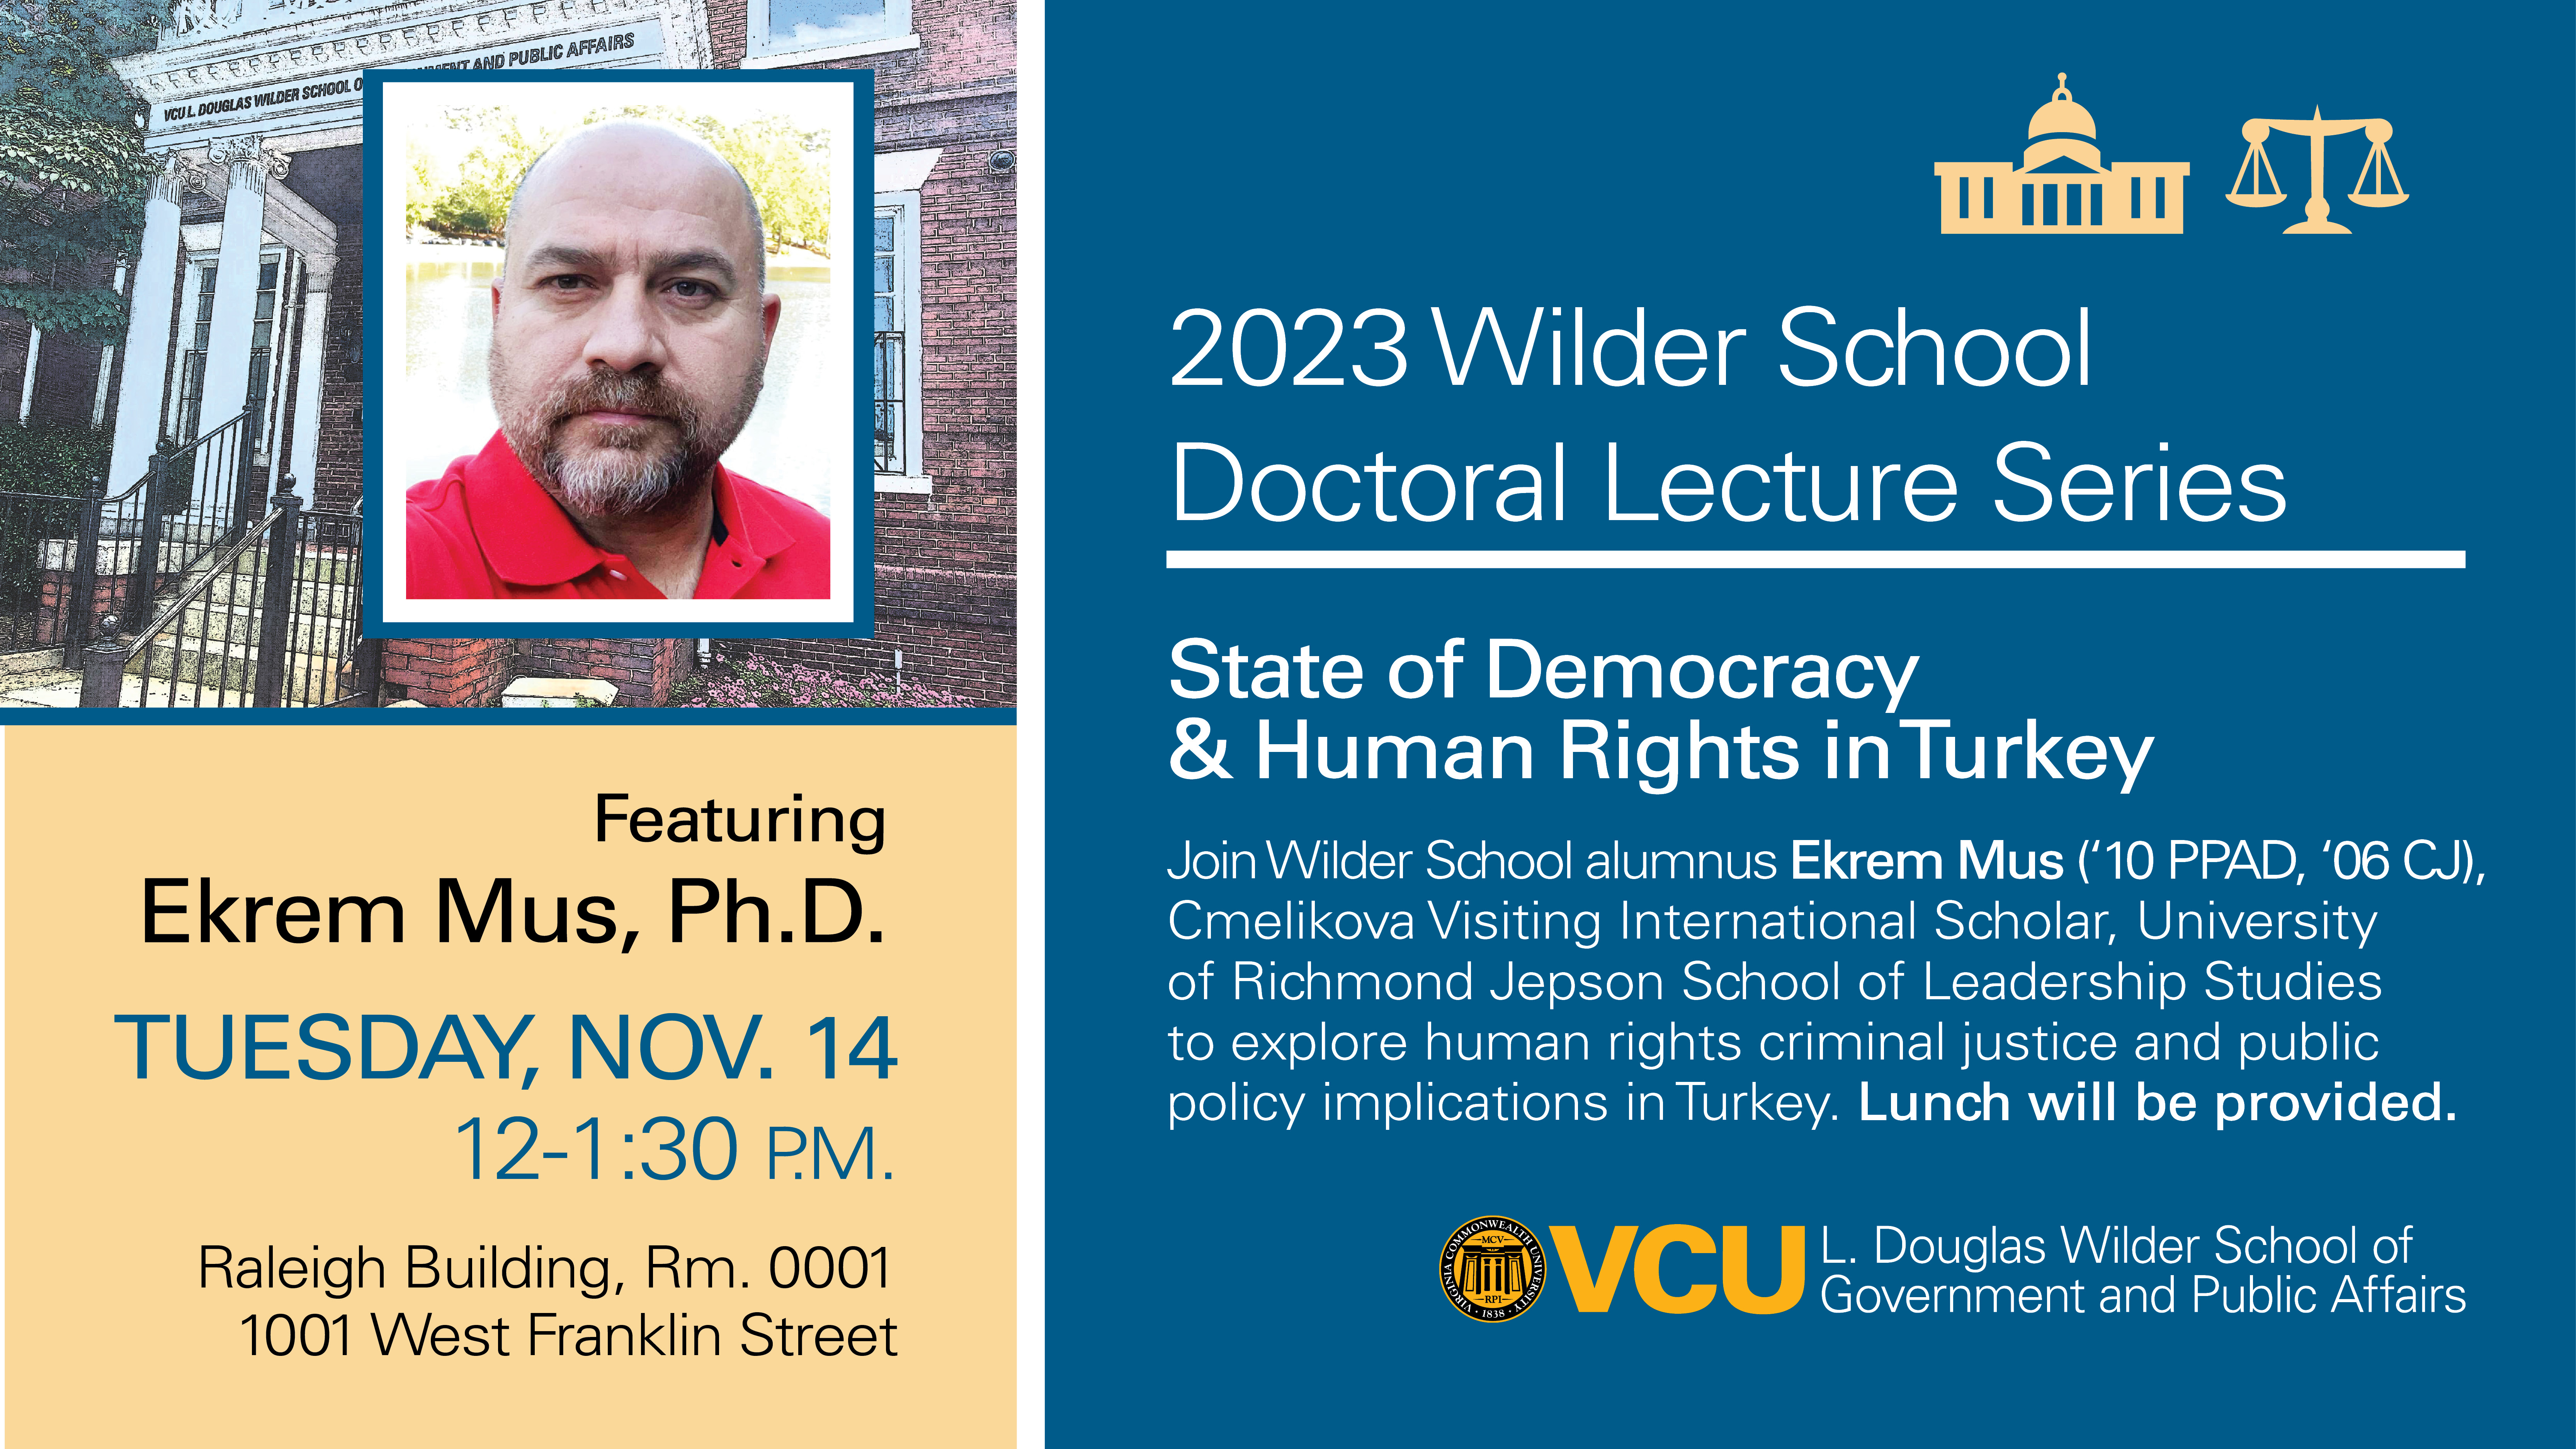 Ekrem Mus is a dual Wilder School alumnus in Public Policy and Administration as well as Criminal Justice.